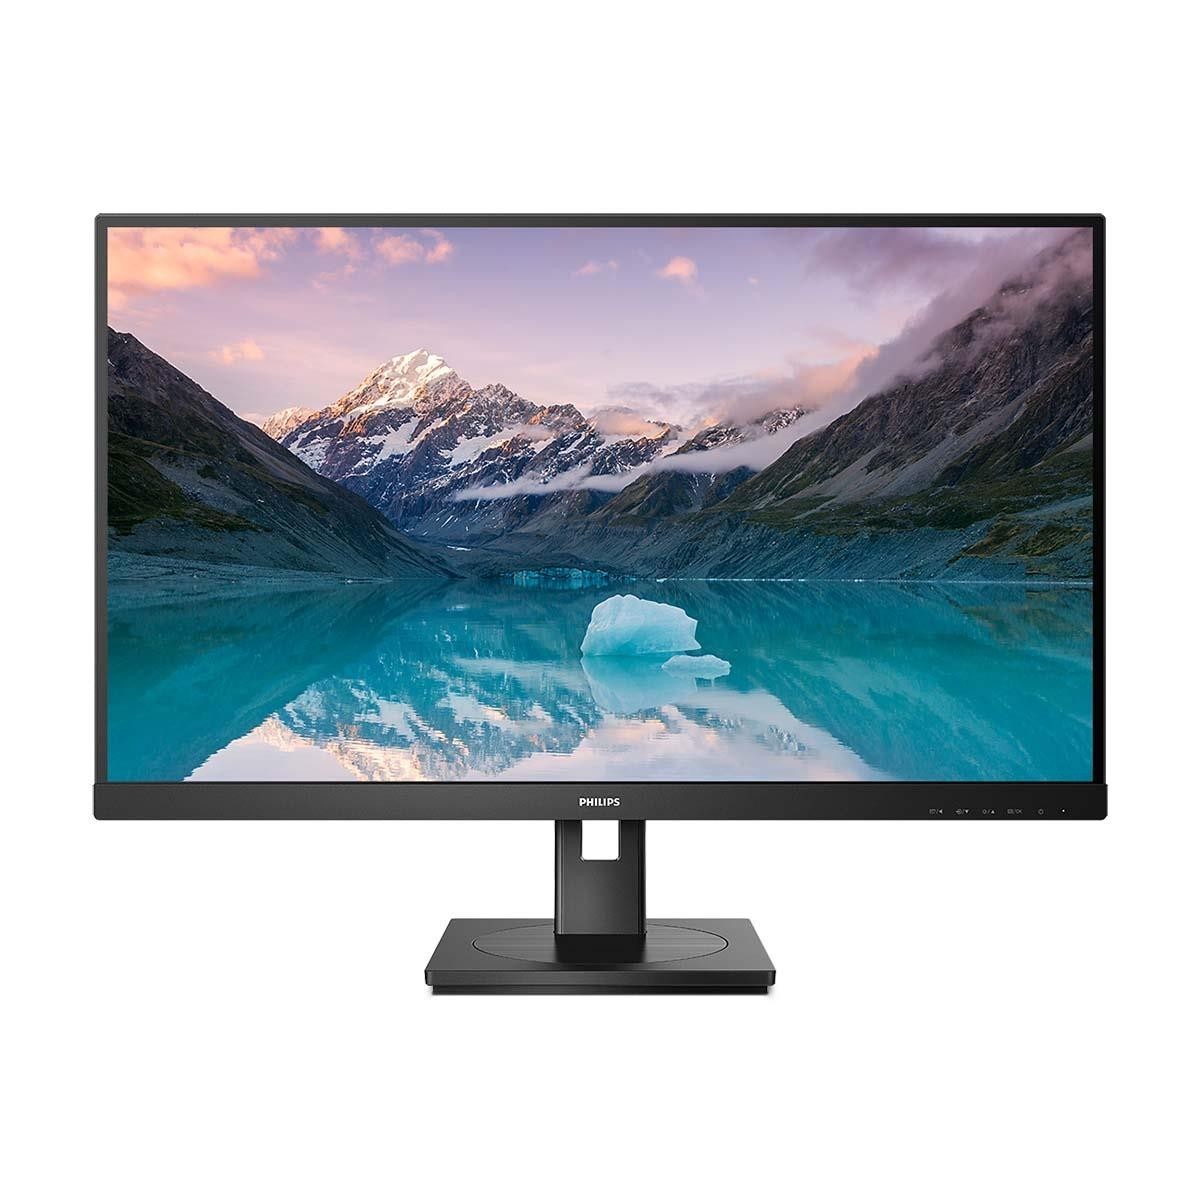 Philips 27IN WLED 2560X1440 4MS 16.9 - Flat Screen - 4 ms